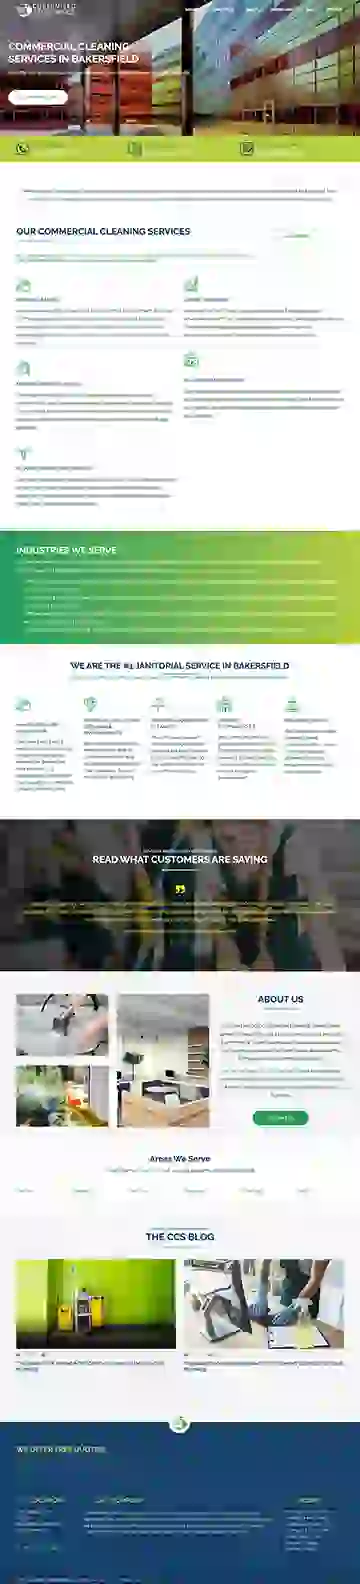 Commercial Cleaning Website Design by Envisager Studio